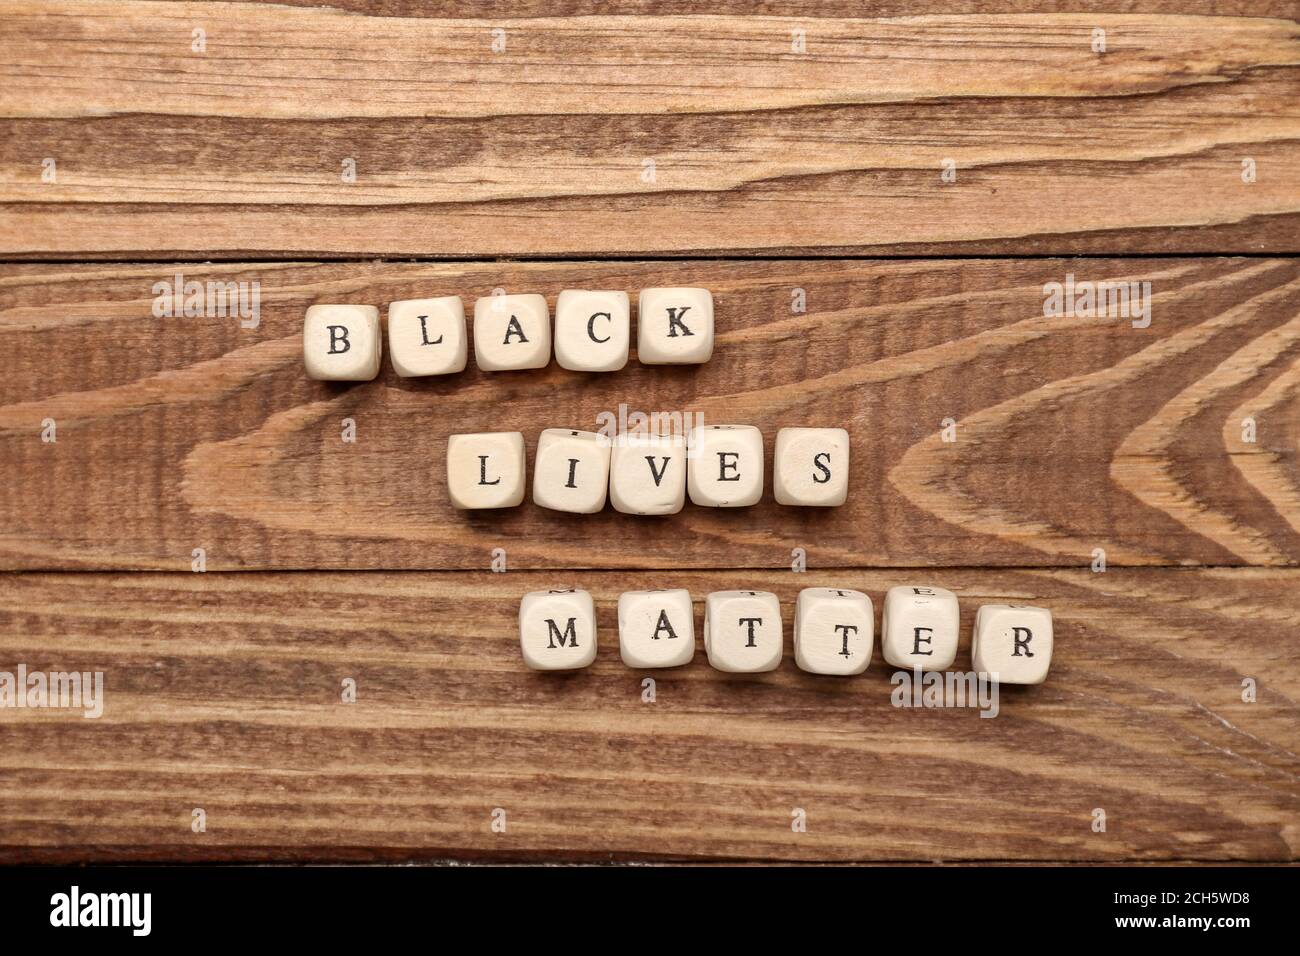 Cubes with text BLACK LIVES MATTER on wooden background Stock Photo